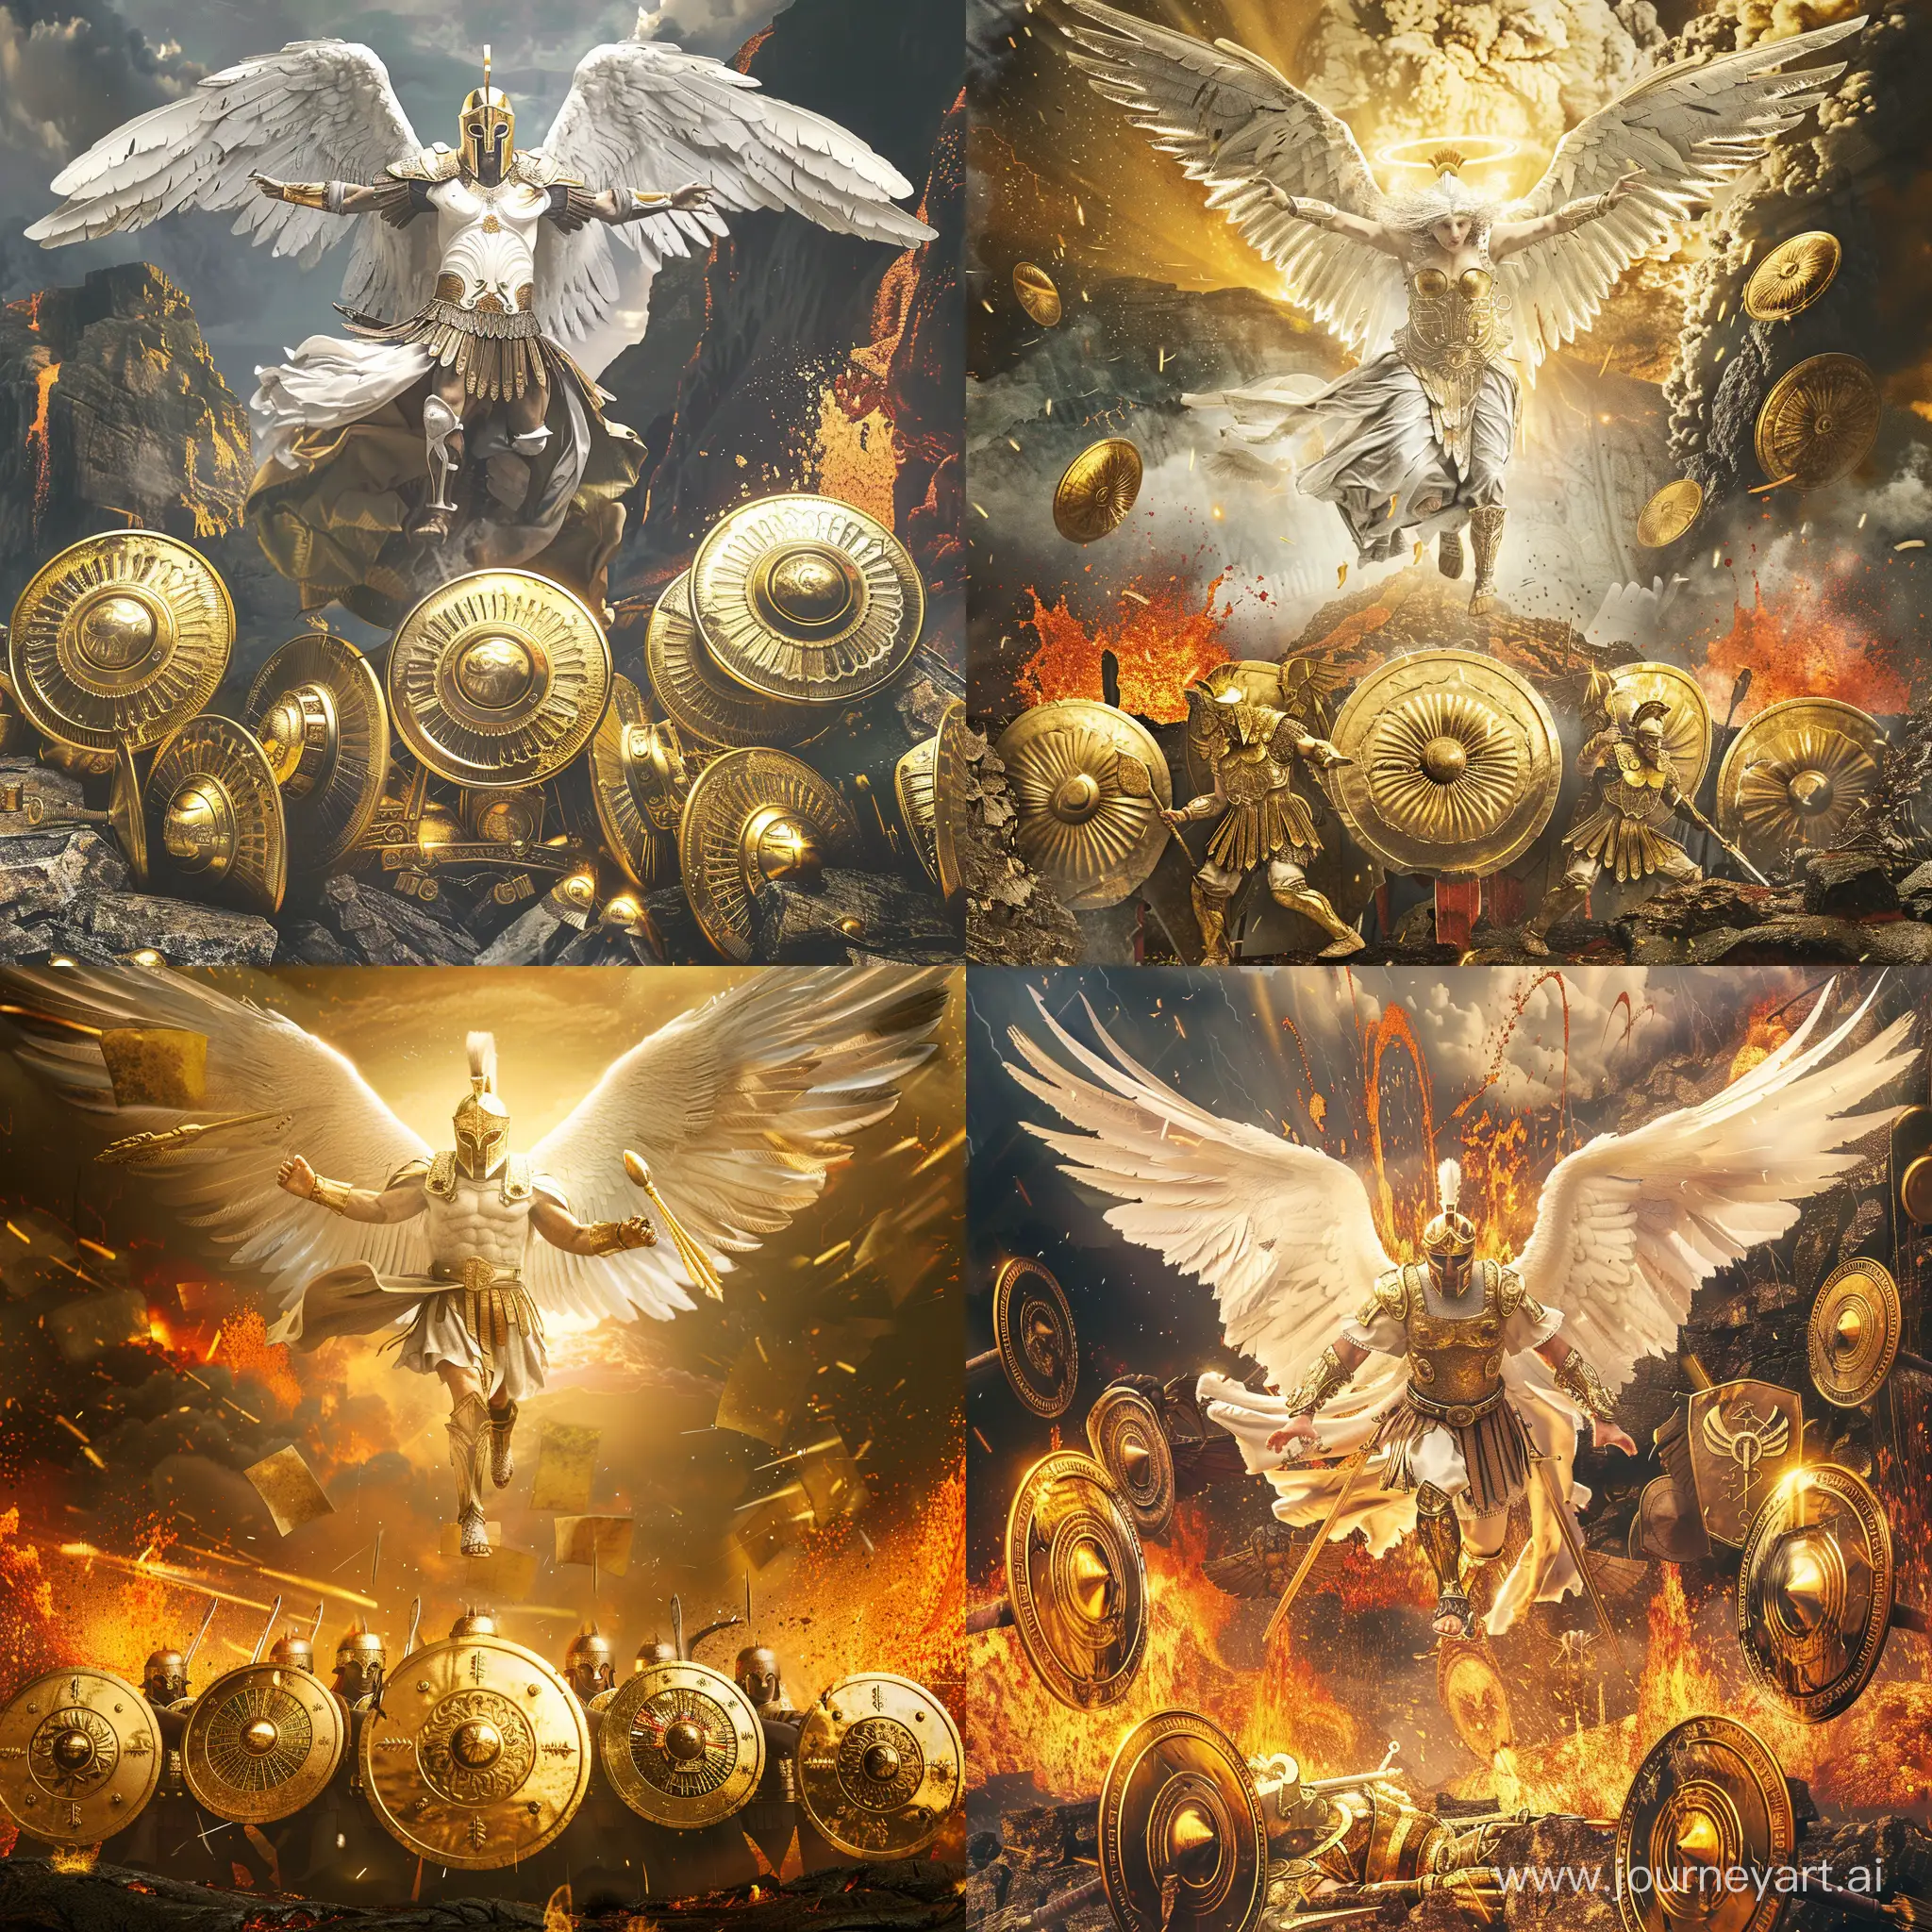 Golden-Archangel-Hovering-Above-Spartan-Shield-Wall-Against-Volcanic-Backdrop